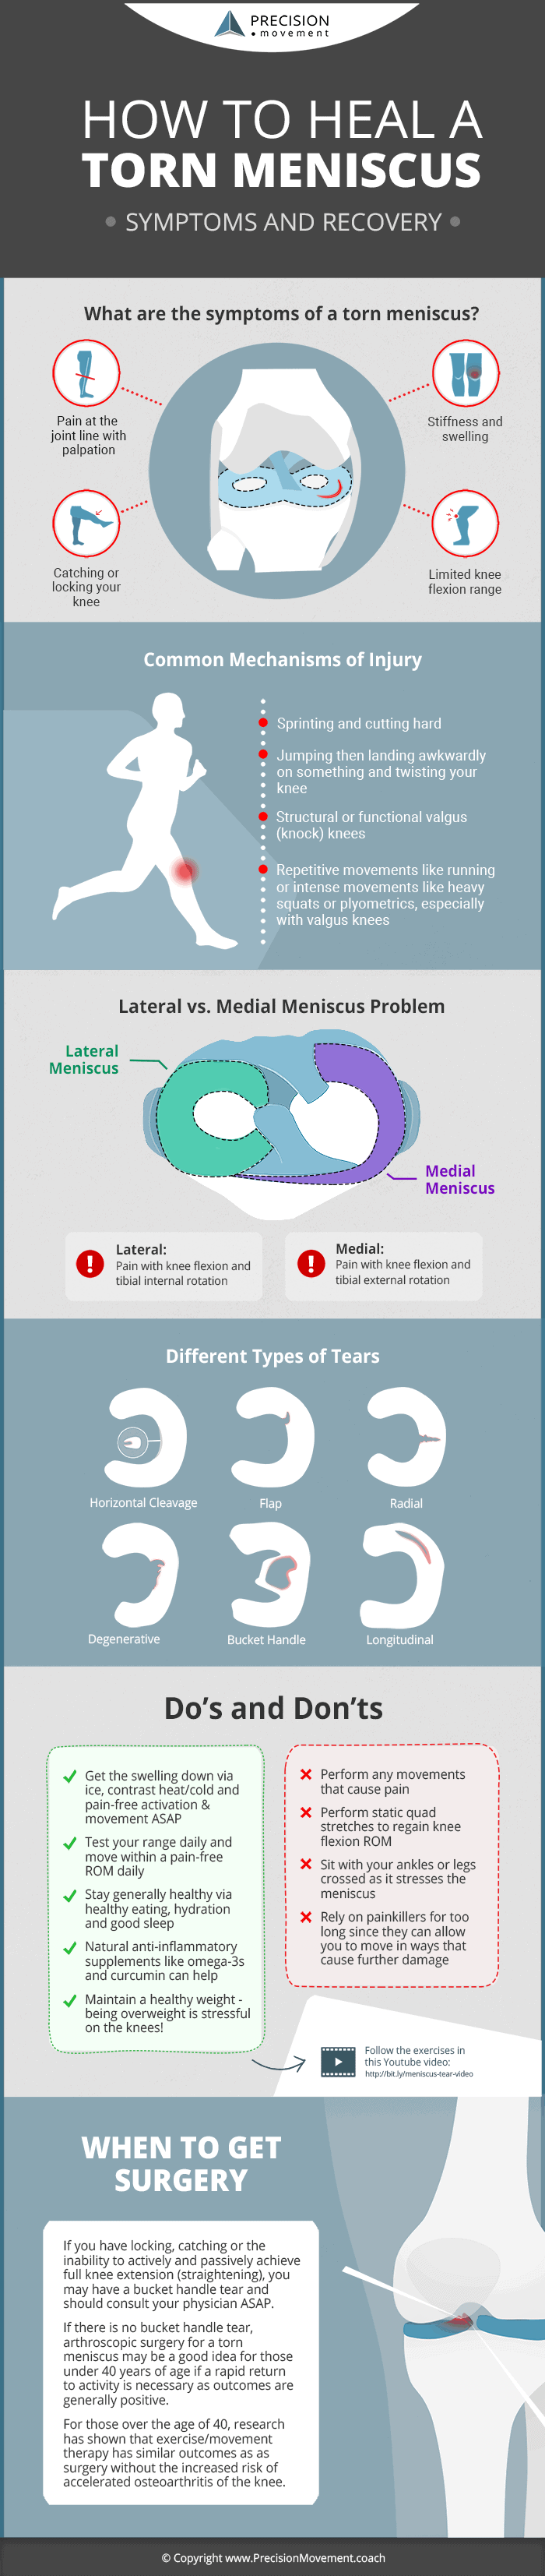 How to Heal a Torn Meniscus Infographic covering: what are the symptoms of a torn meniscus, common mechanisms of injury, lateral vs medial meniscus, different types of tear, do's and dont's, when to get surgery